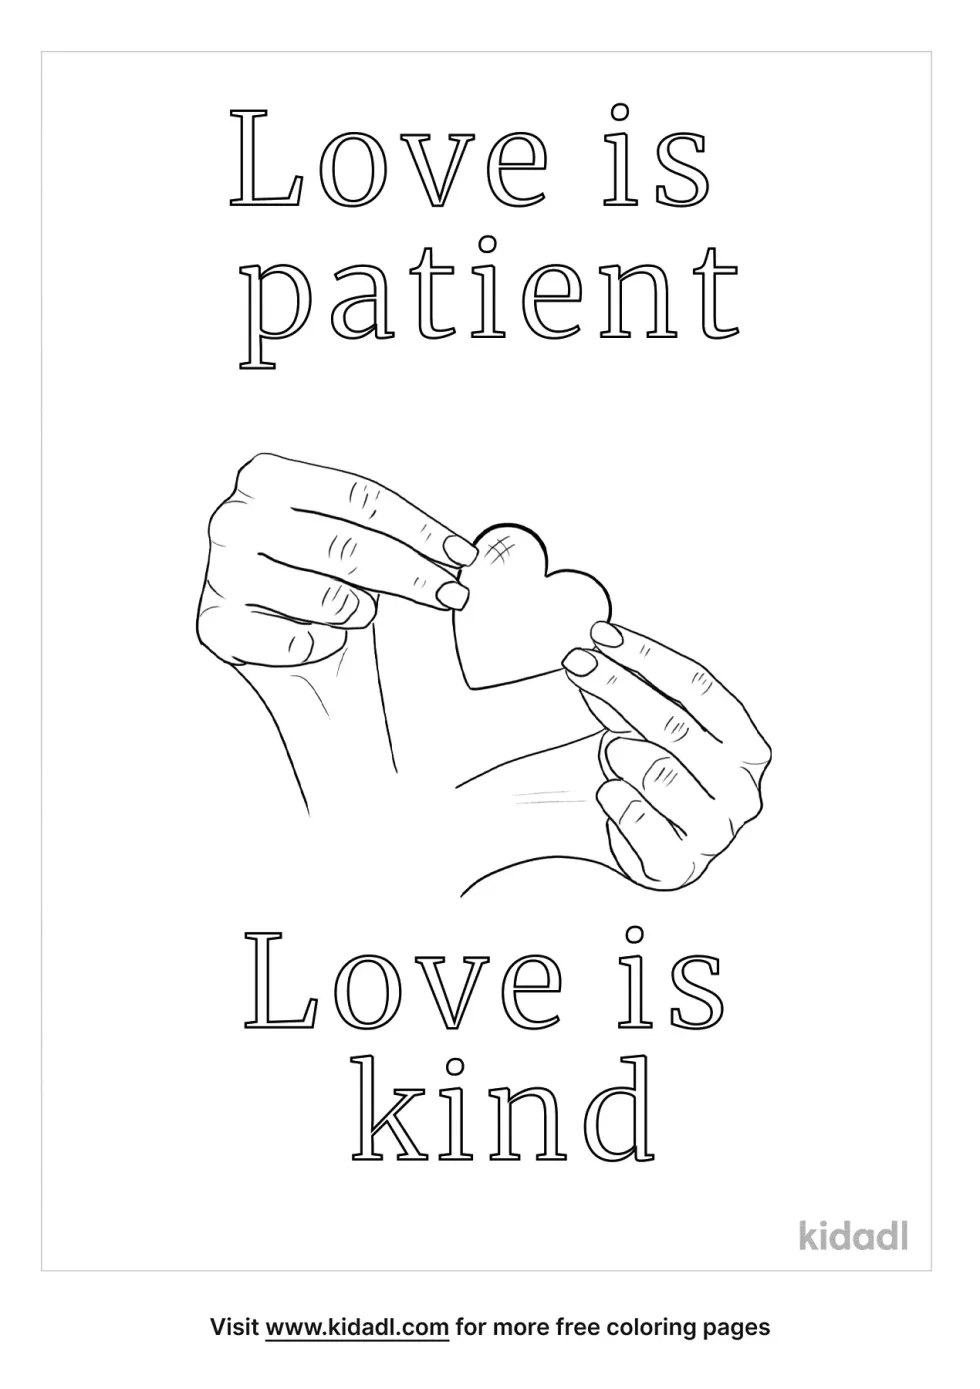 A coloring image showing the words "Love is patient" and "Love is kind", around a pair of hands holding a heart-shaped object